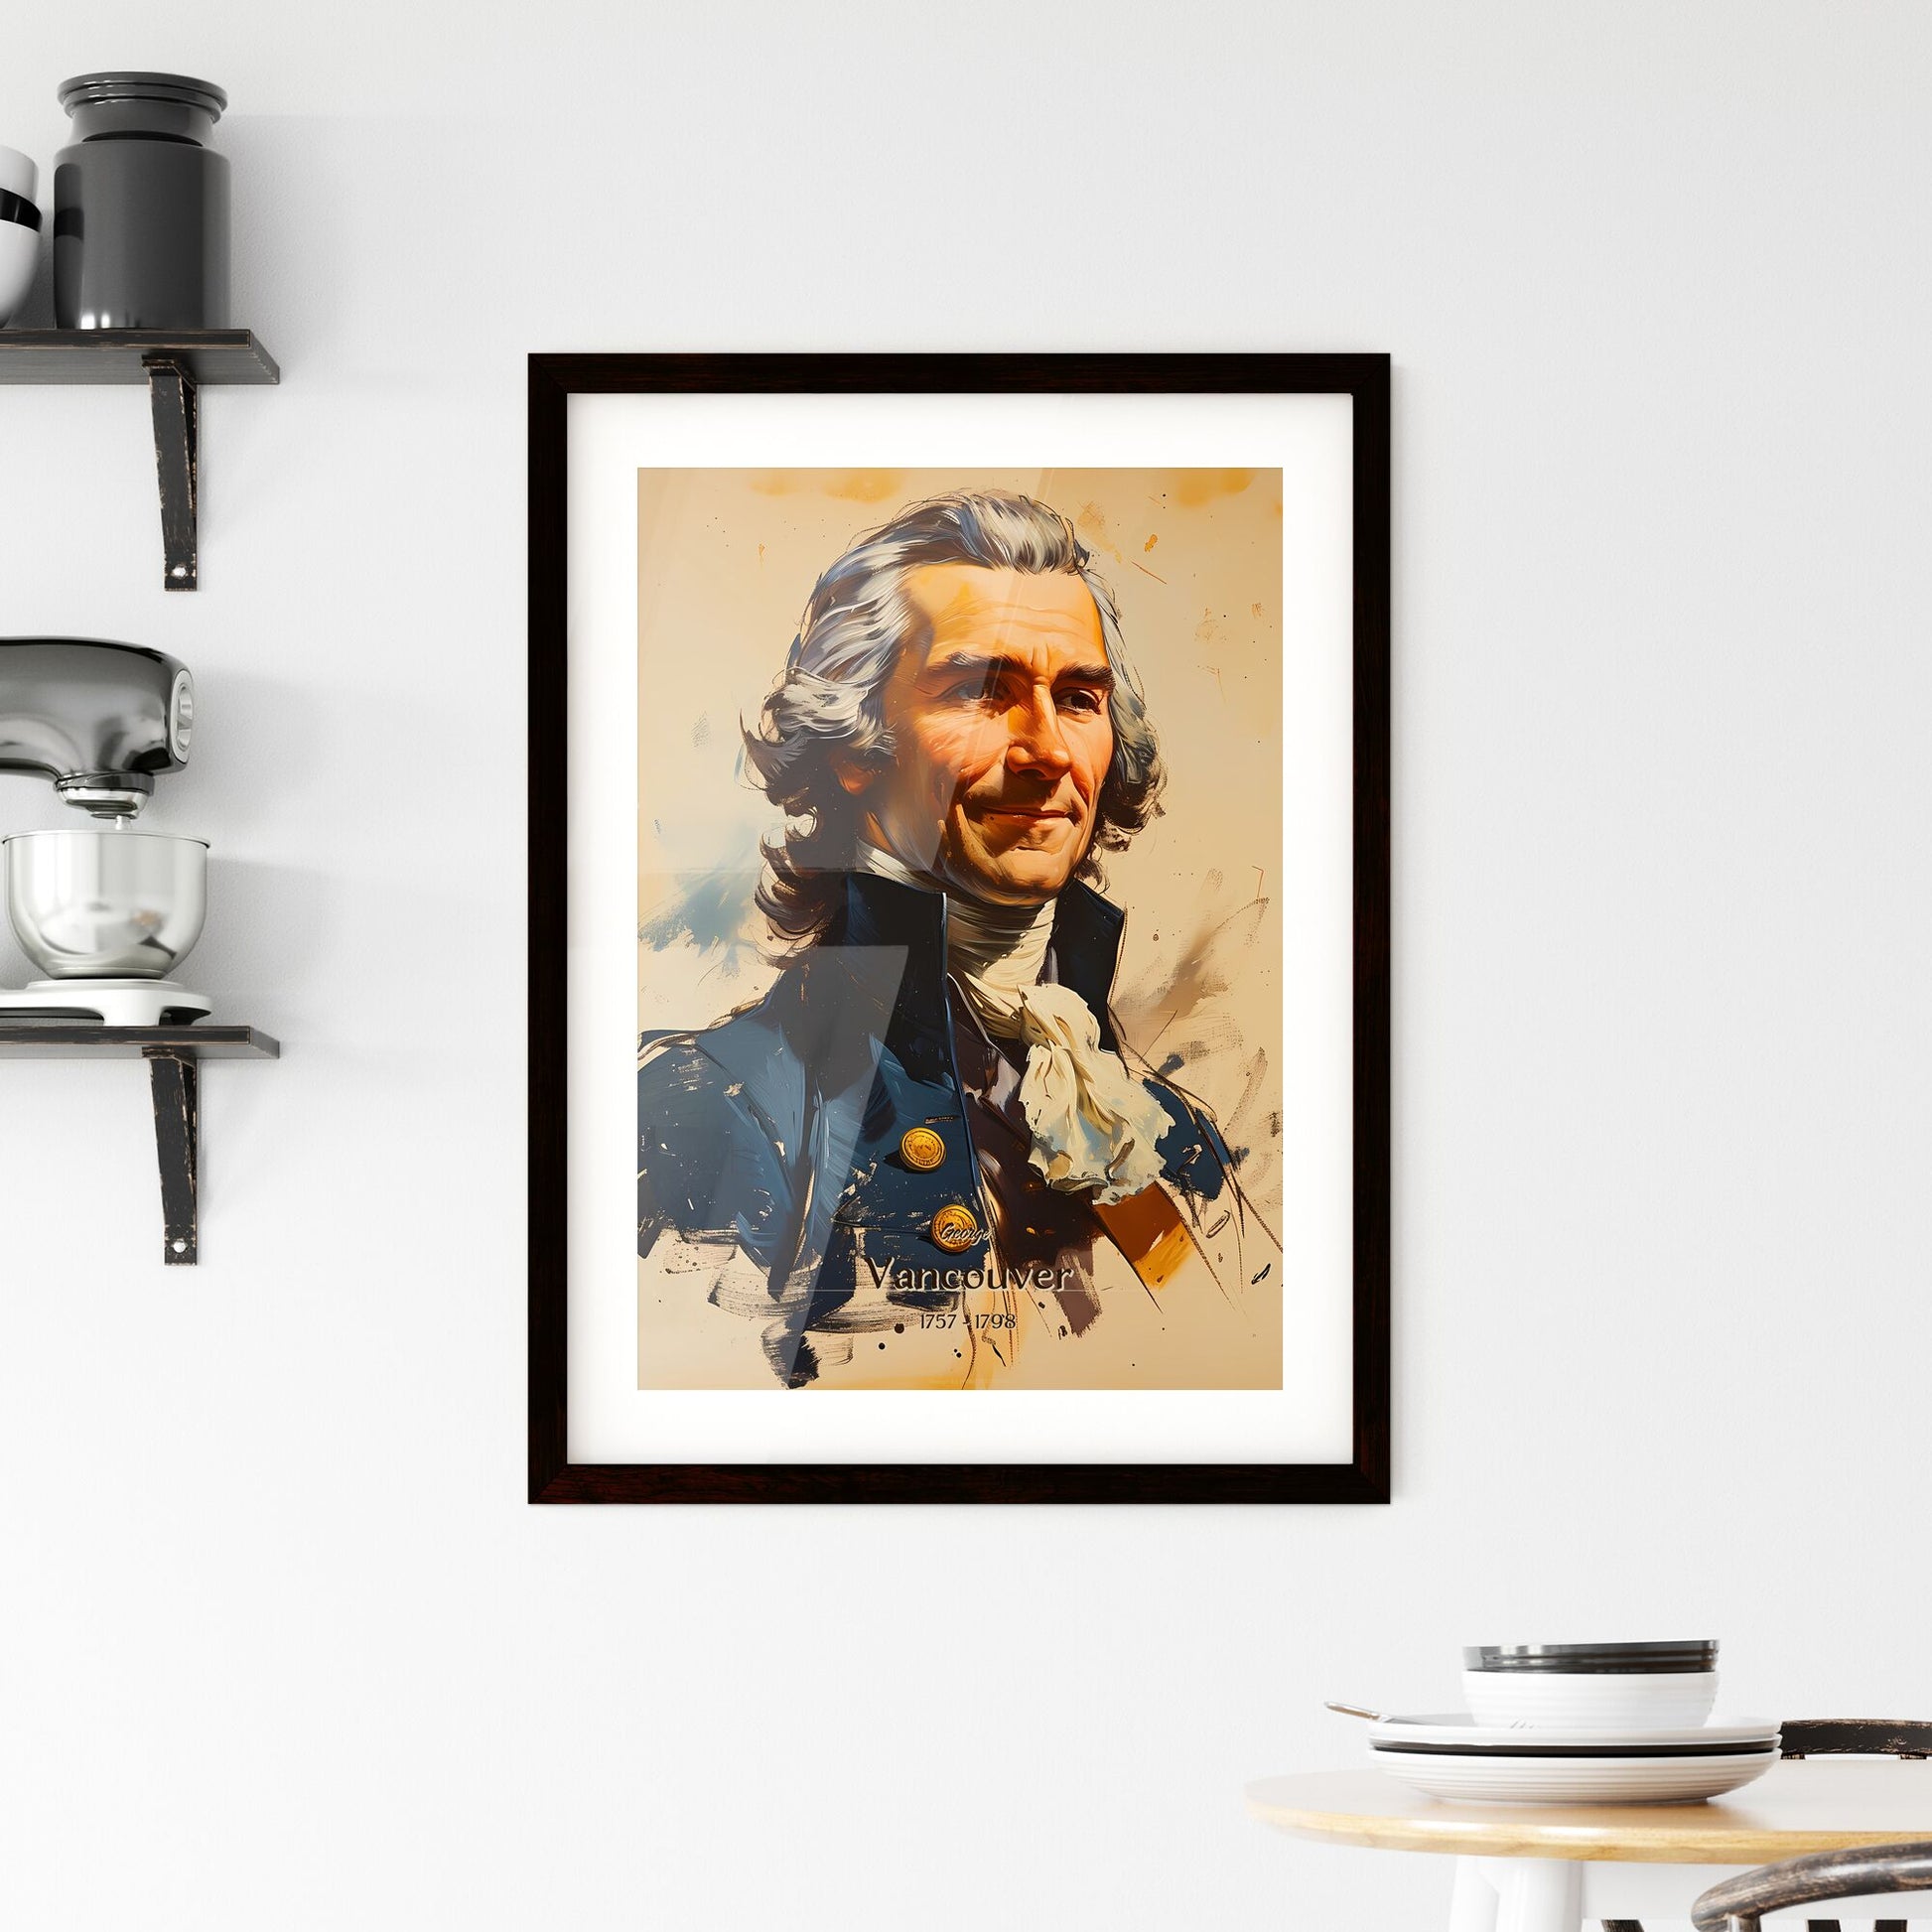 George, Vancouver, 1757 - 1798, A Poster of a painting of a man in a military uniform Default Title